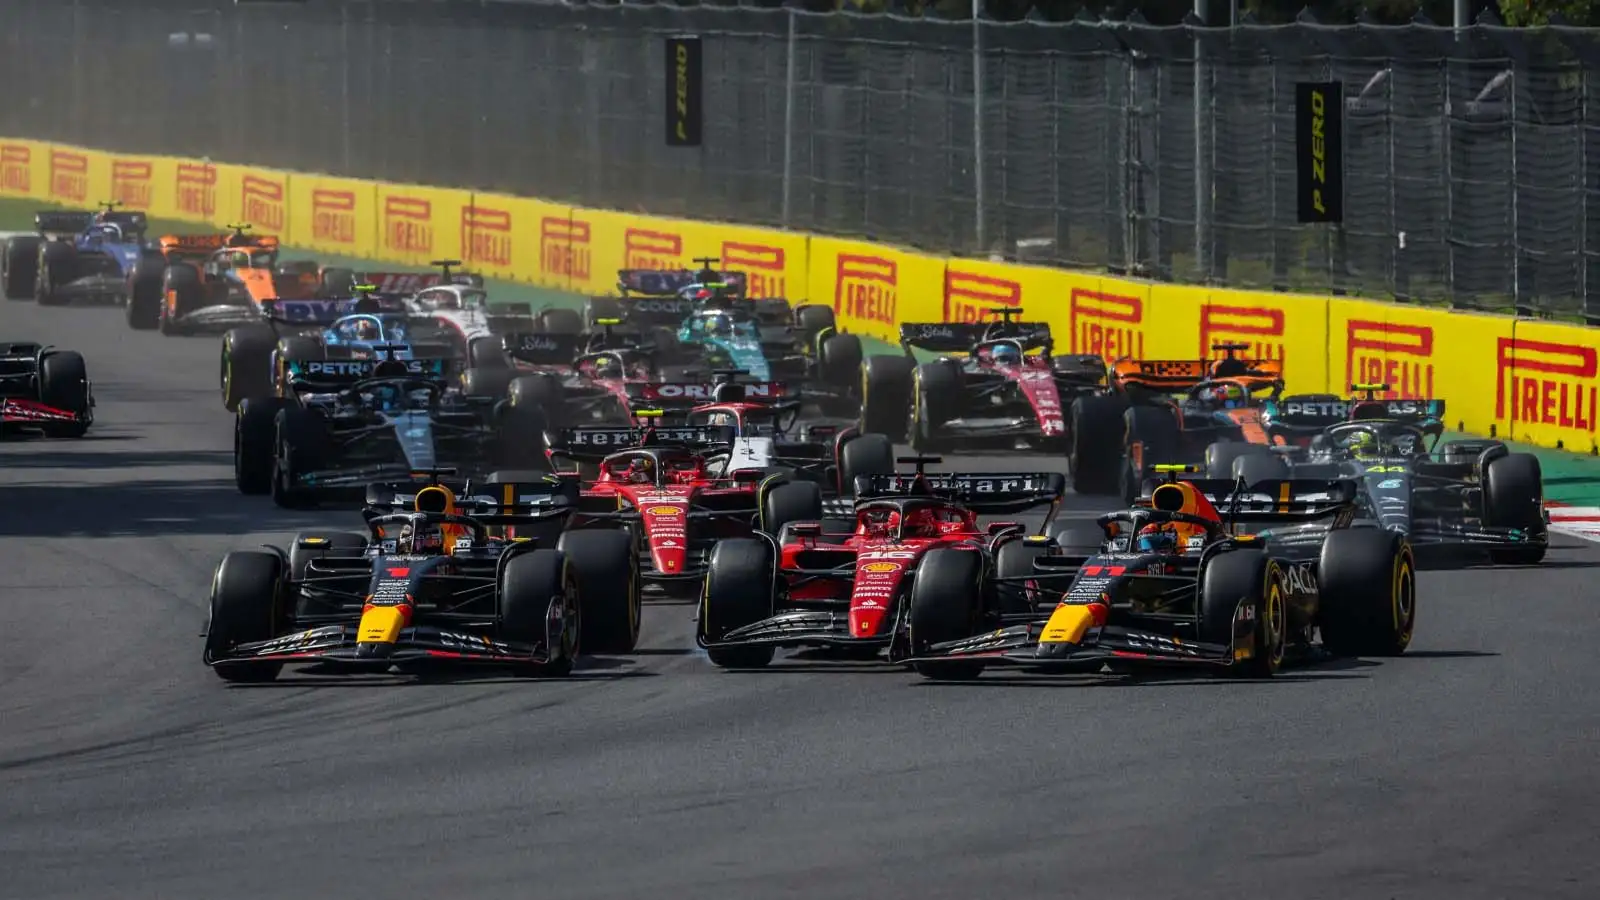 Max Verstappen leads the field into Turn 1 at the Mexican Grand Prix.